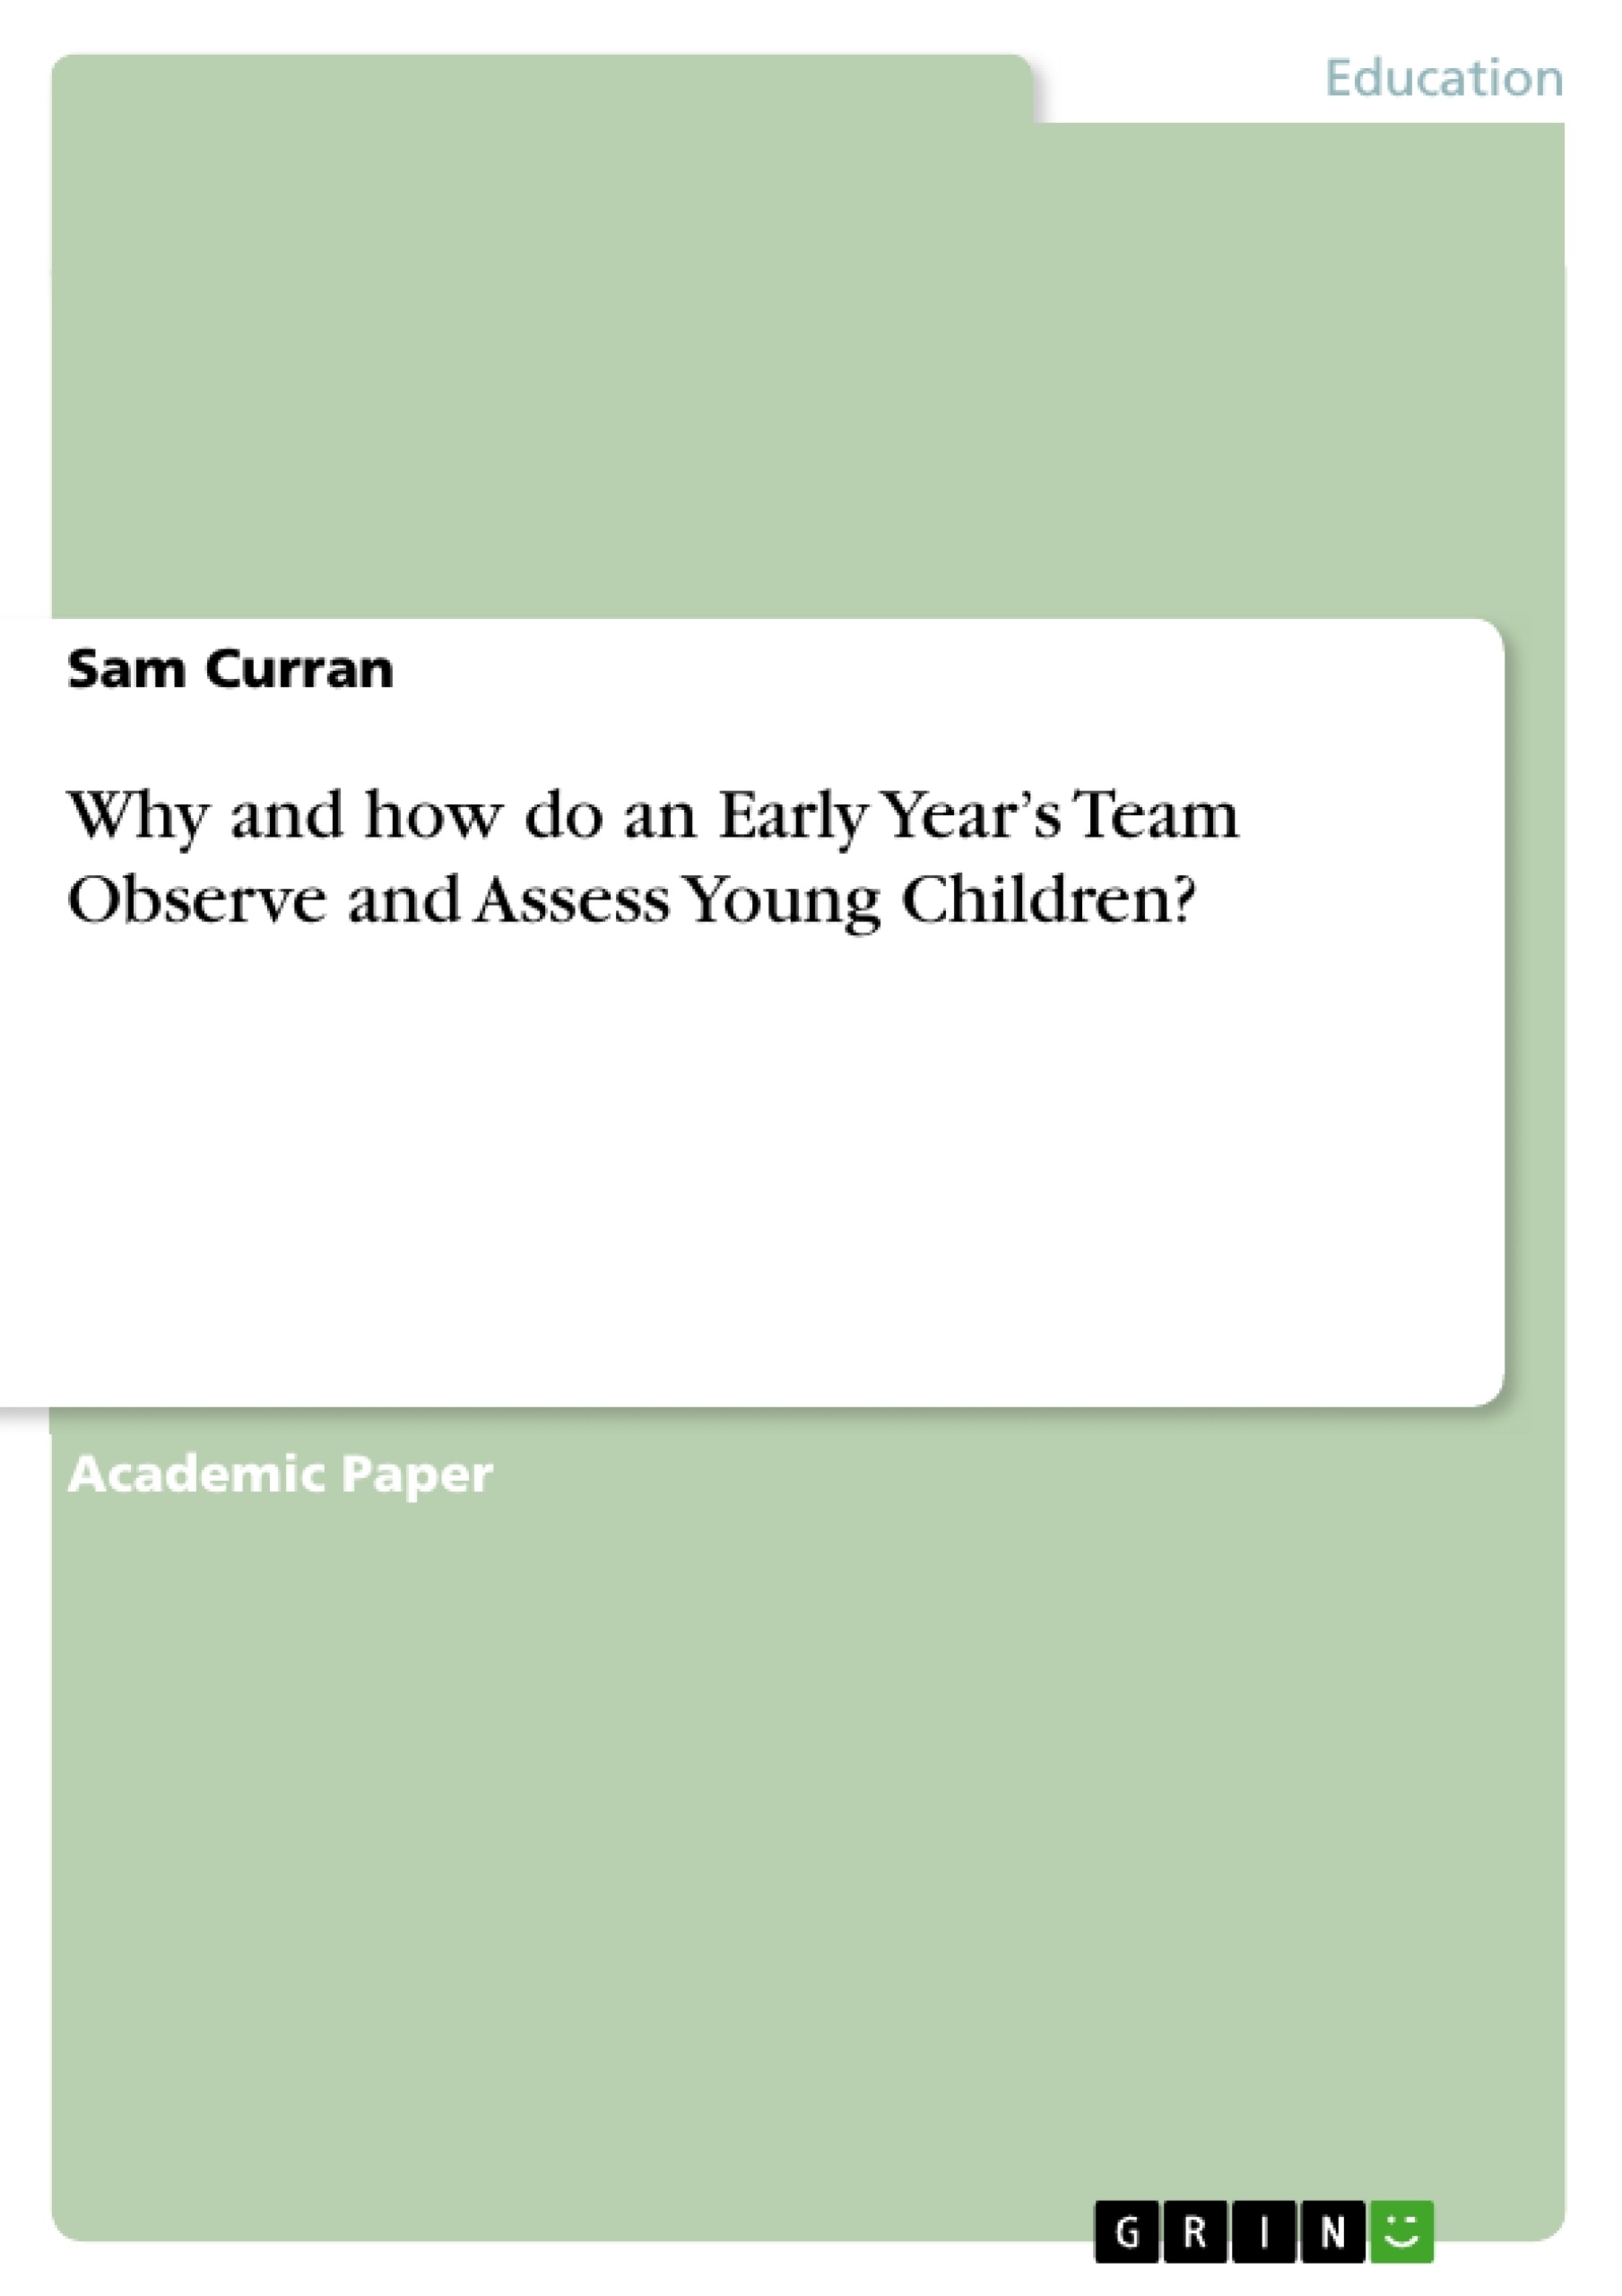 Titel: Why and how do an Early Year’s Team Observe and Assess Young Children?